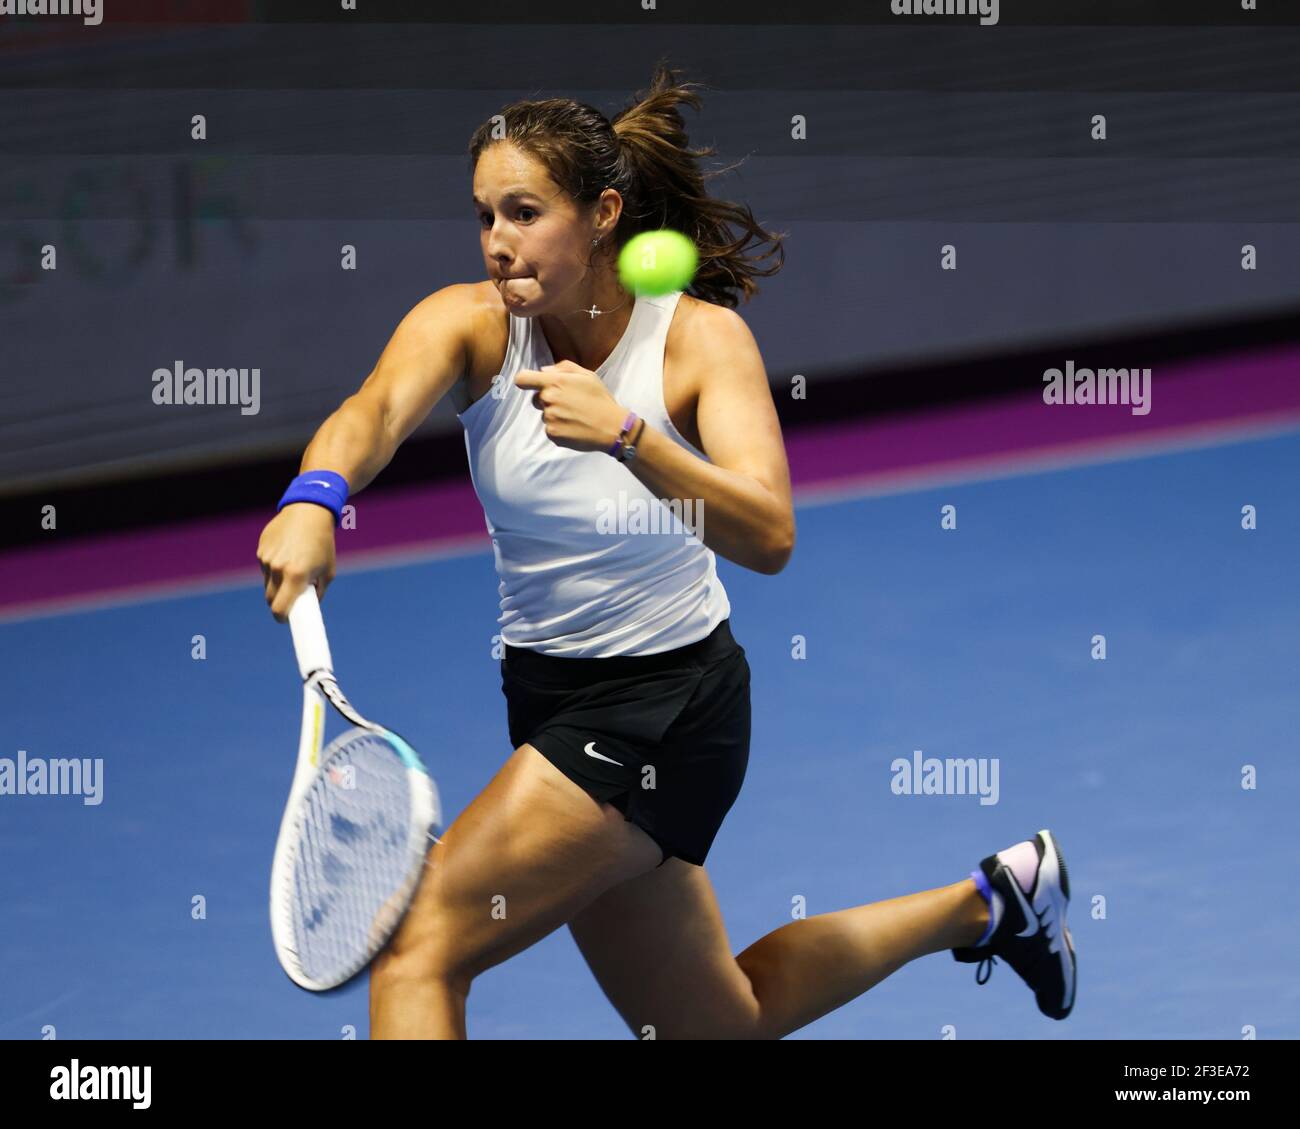 Daria Kasatkina of Russia seen in action during a match against Clara Tauson of Denmark at the St